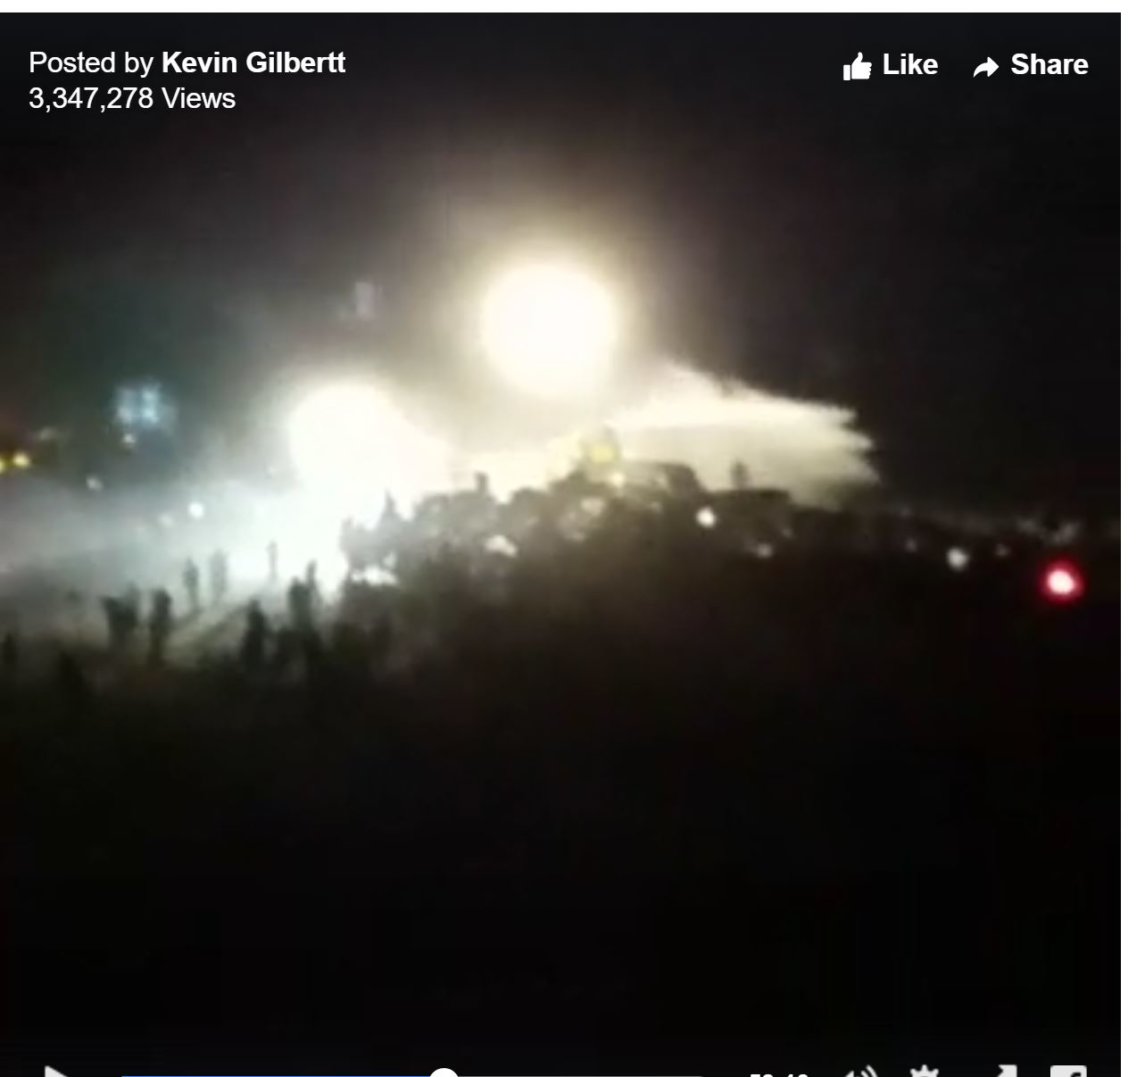 Live Stream Cut Off As Police Spray DAPL Protesters With Water Cannons in Below Freezing Temps